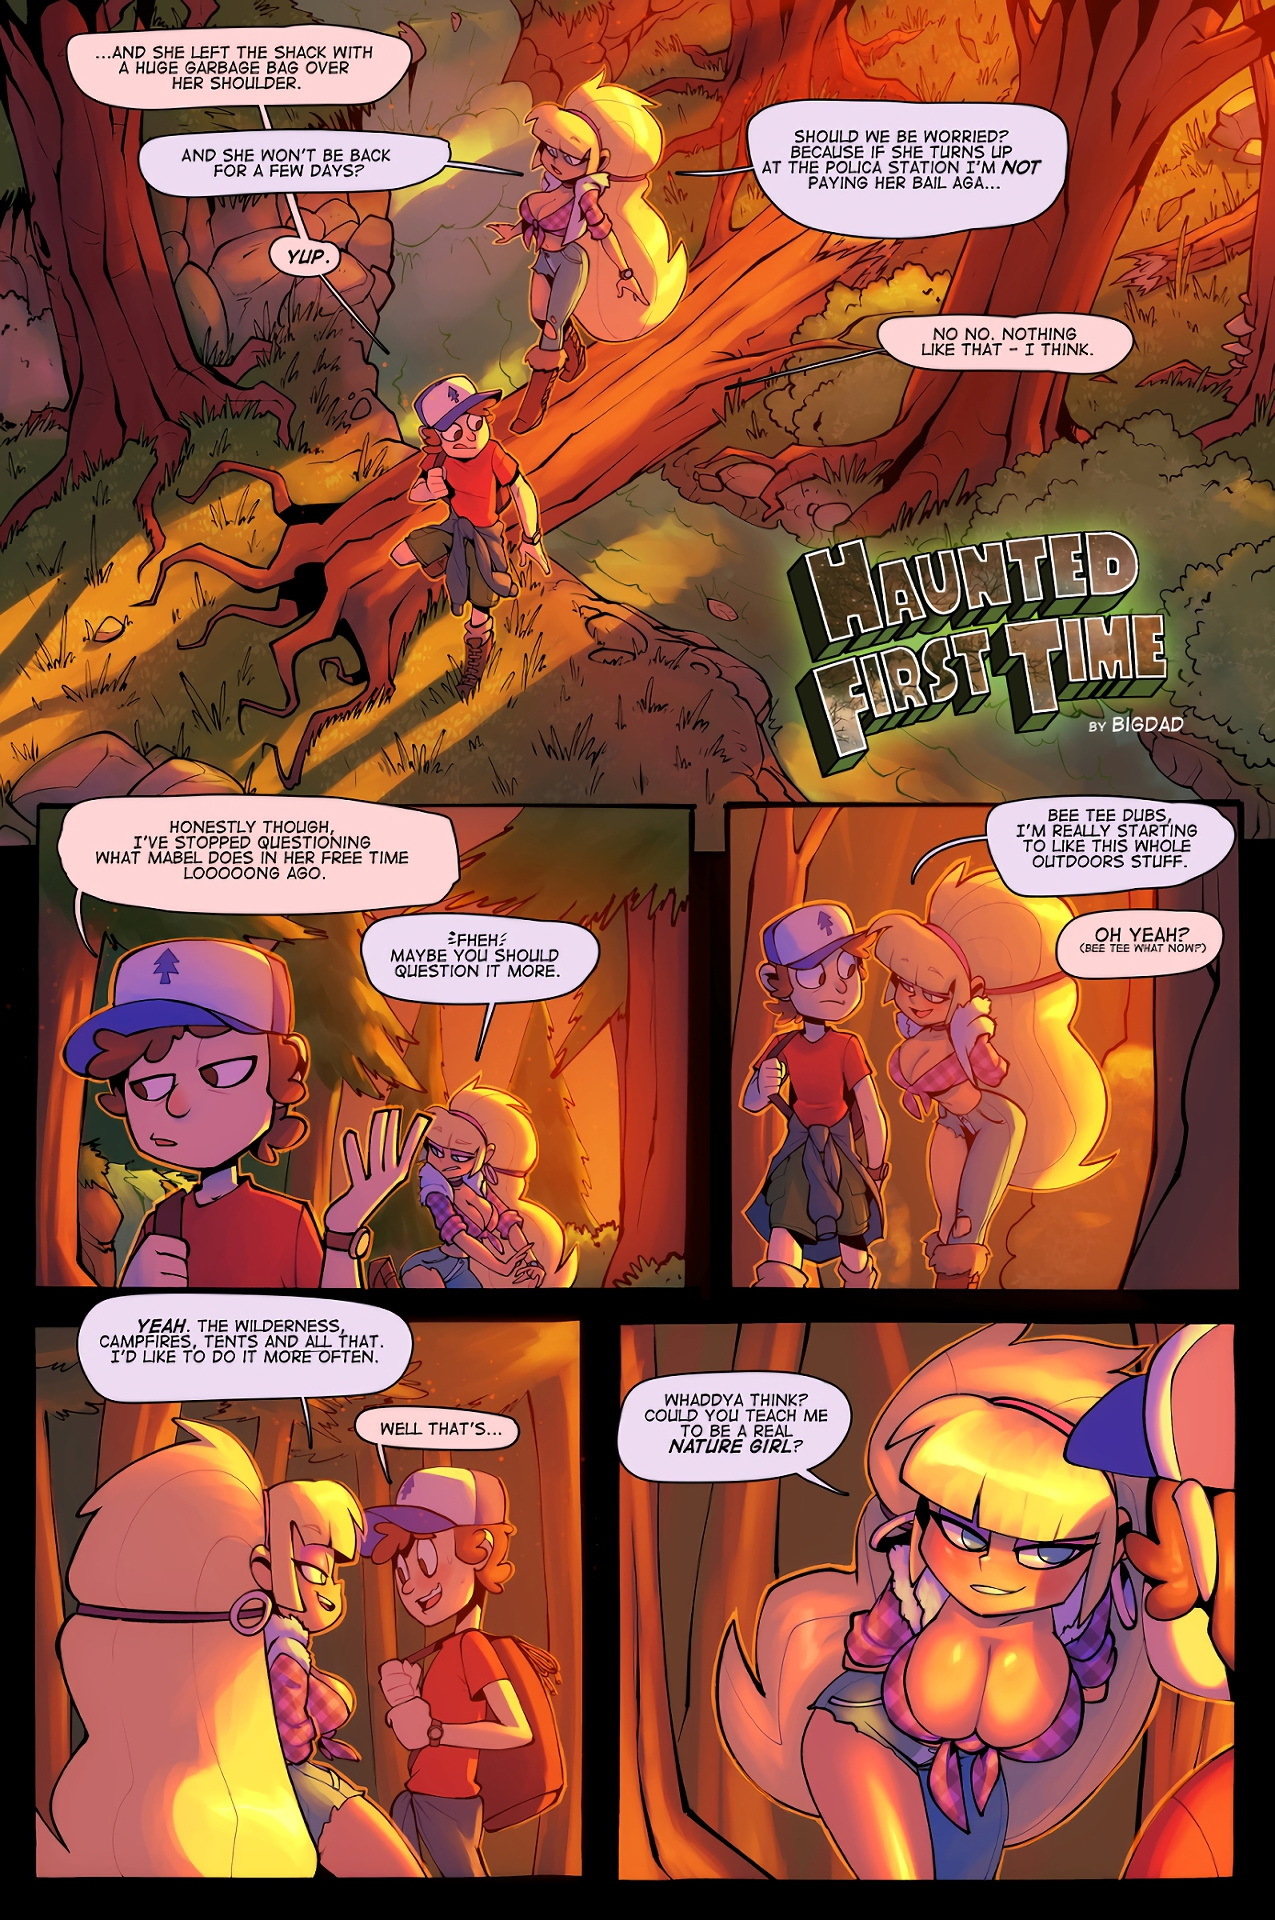 Haunted First Time - Page 1